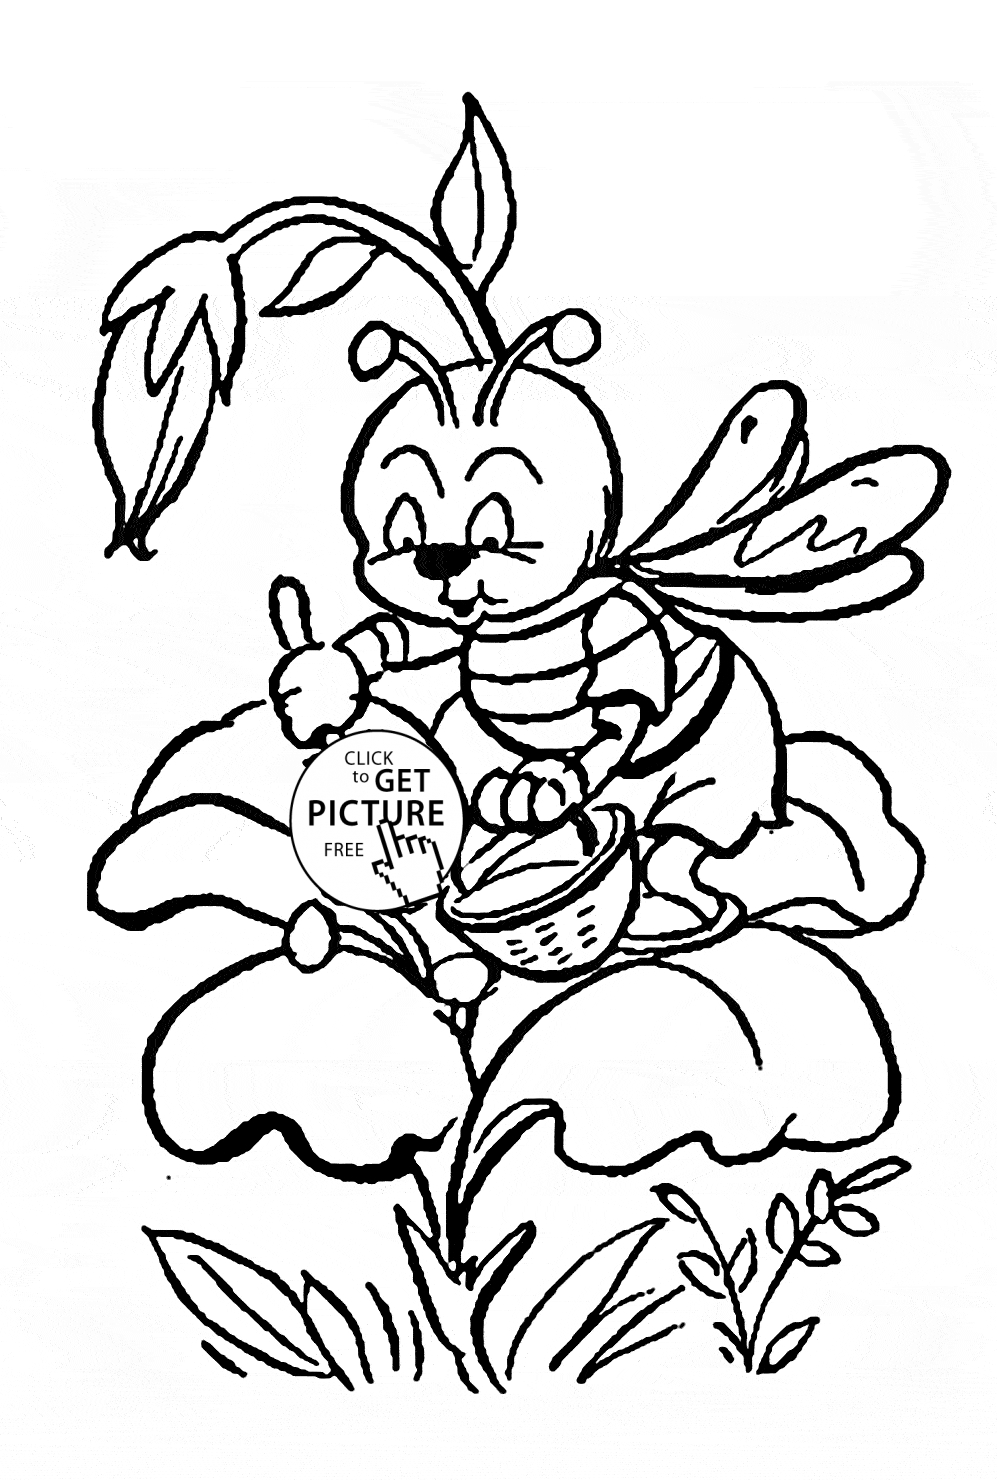 Flowers Coloring Pages Free Printable Cute Little Bee Pollinating A Flower Coloring Page For Kids Flower